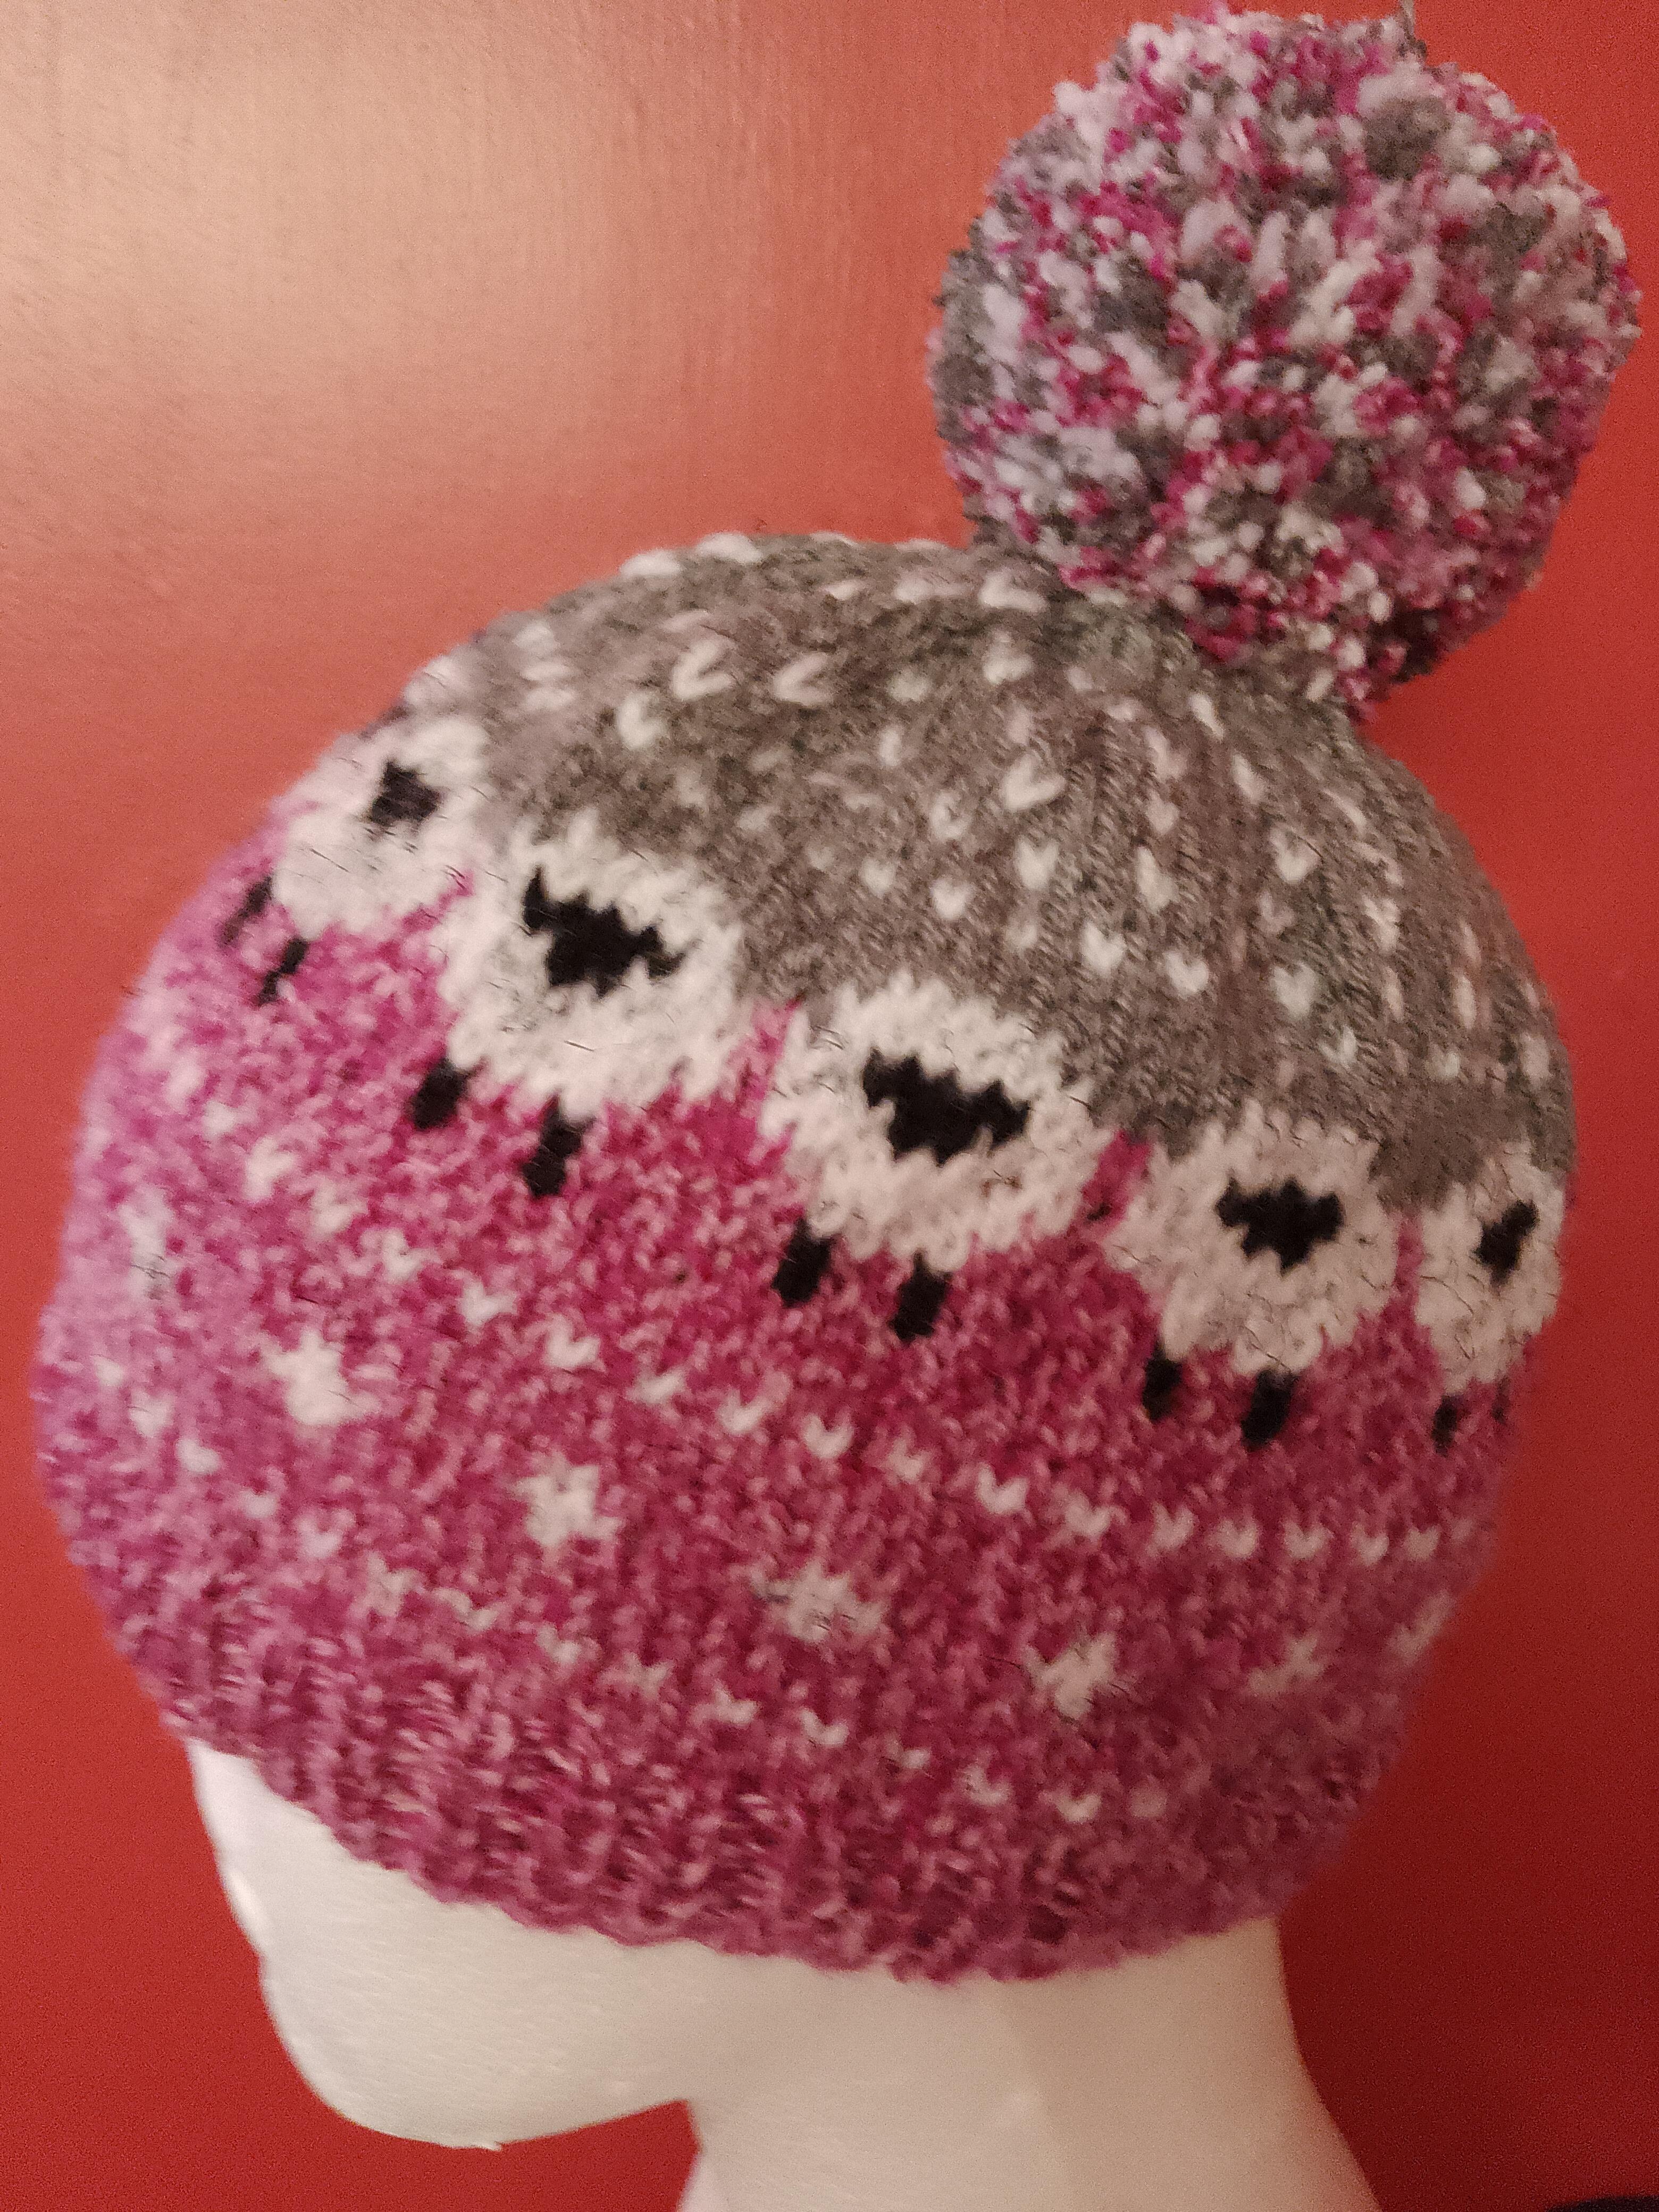 Mottled pink and grey hat with sheep